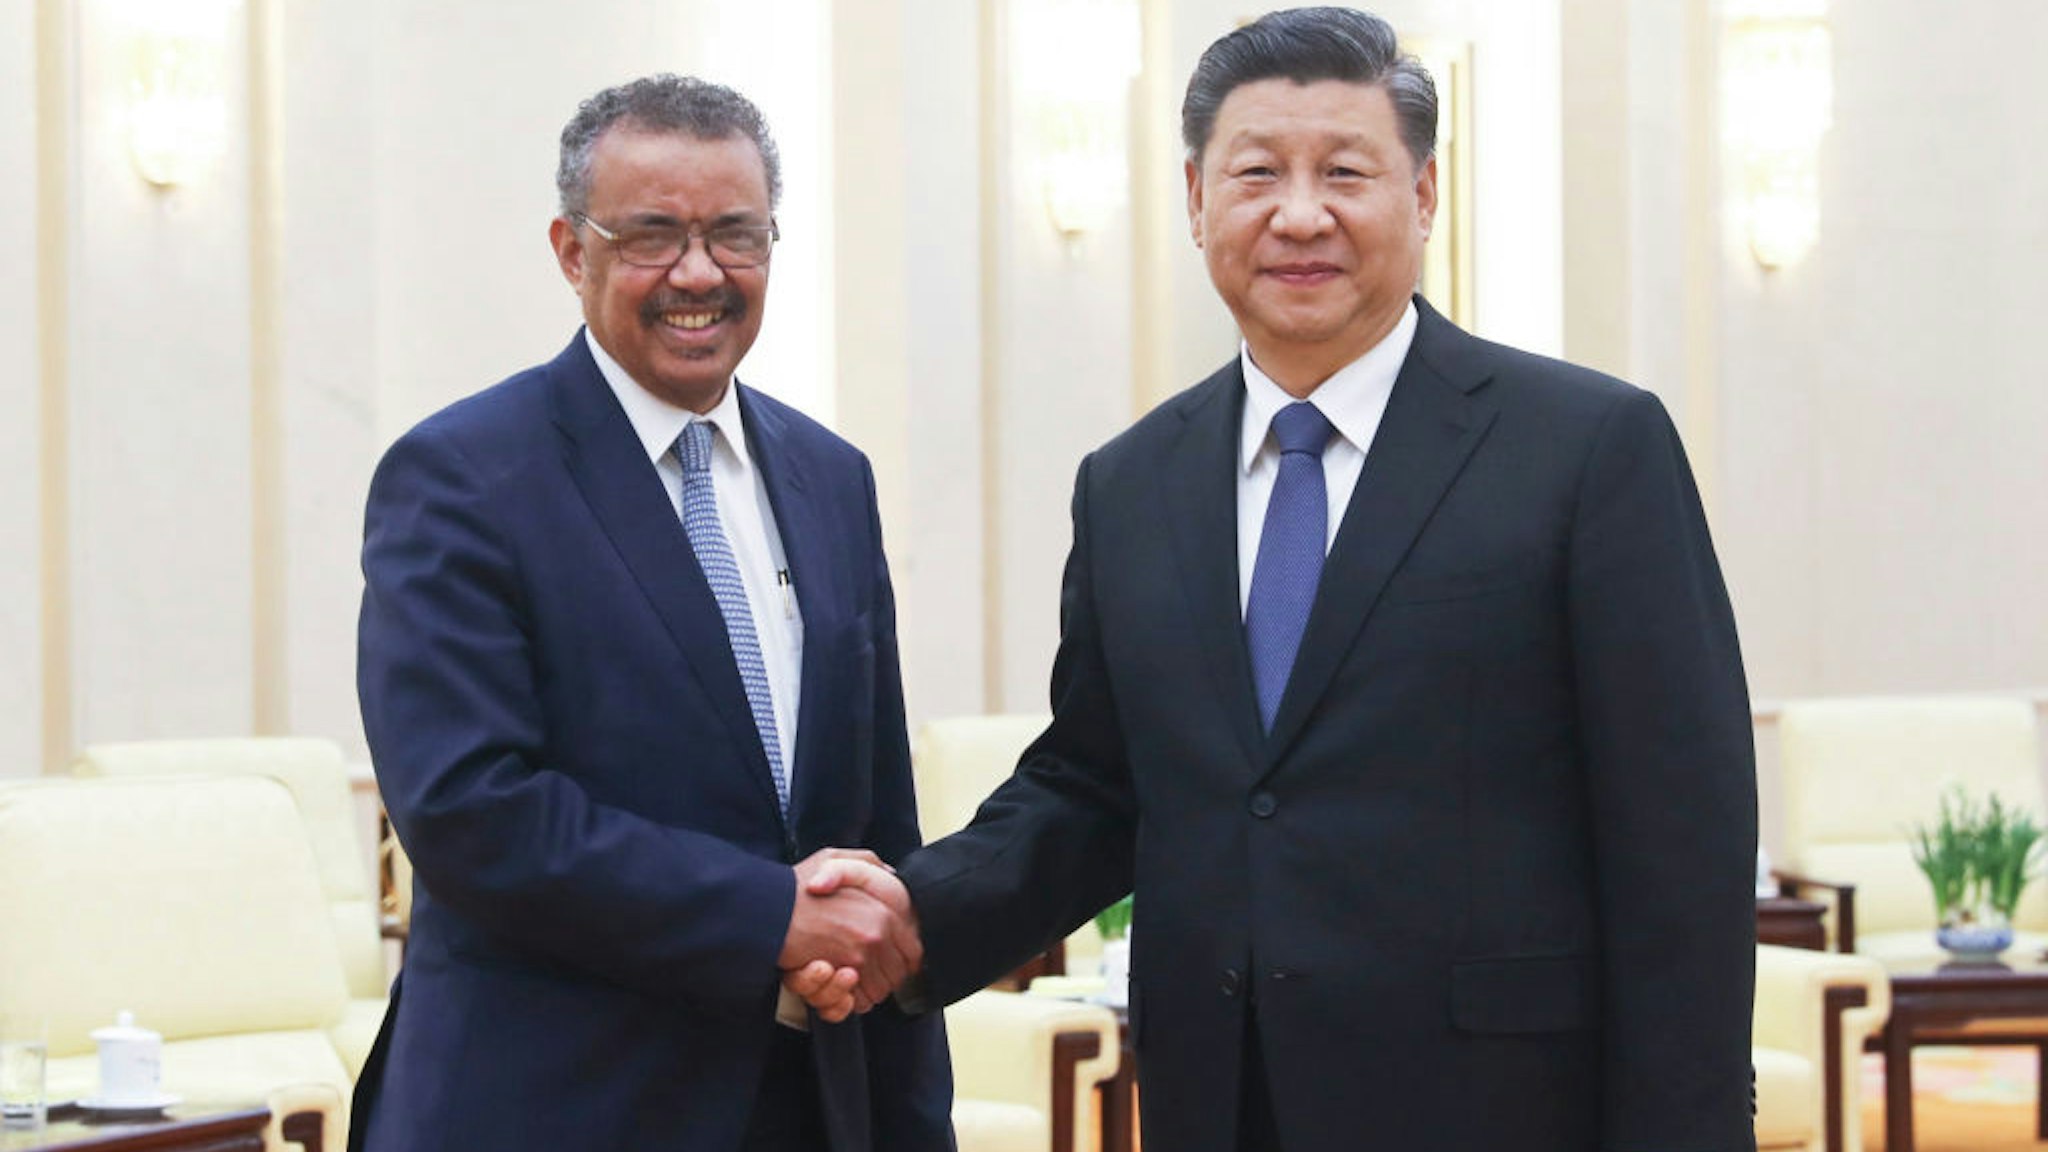 Chinese President Xi Jinping meets with visiting World Health Organization Director-General Tedros Adhanom Ghebreyesus at the Great Hall of the People in Beijing, capital of China, Jan. 28, 2020.